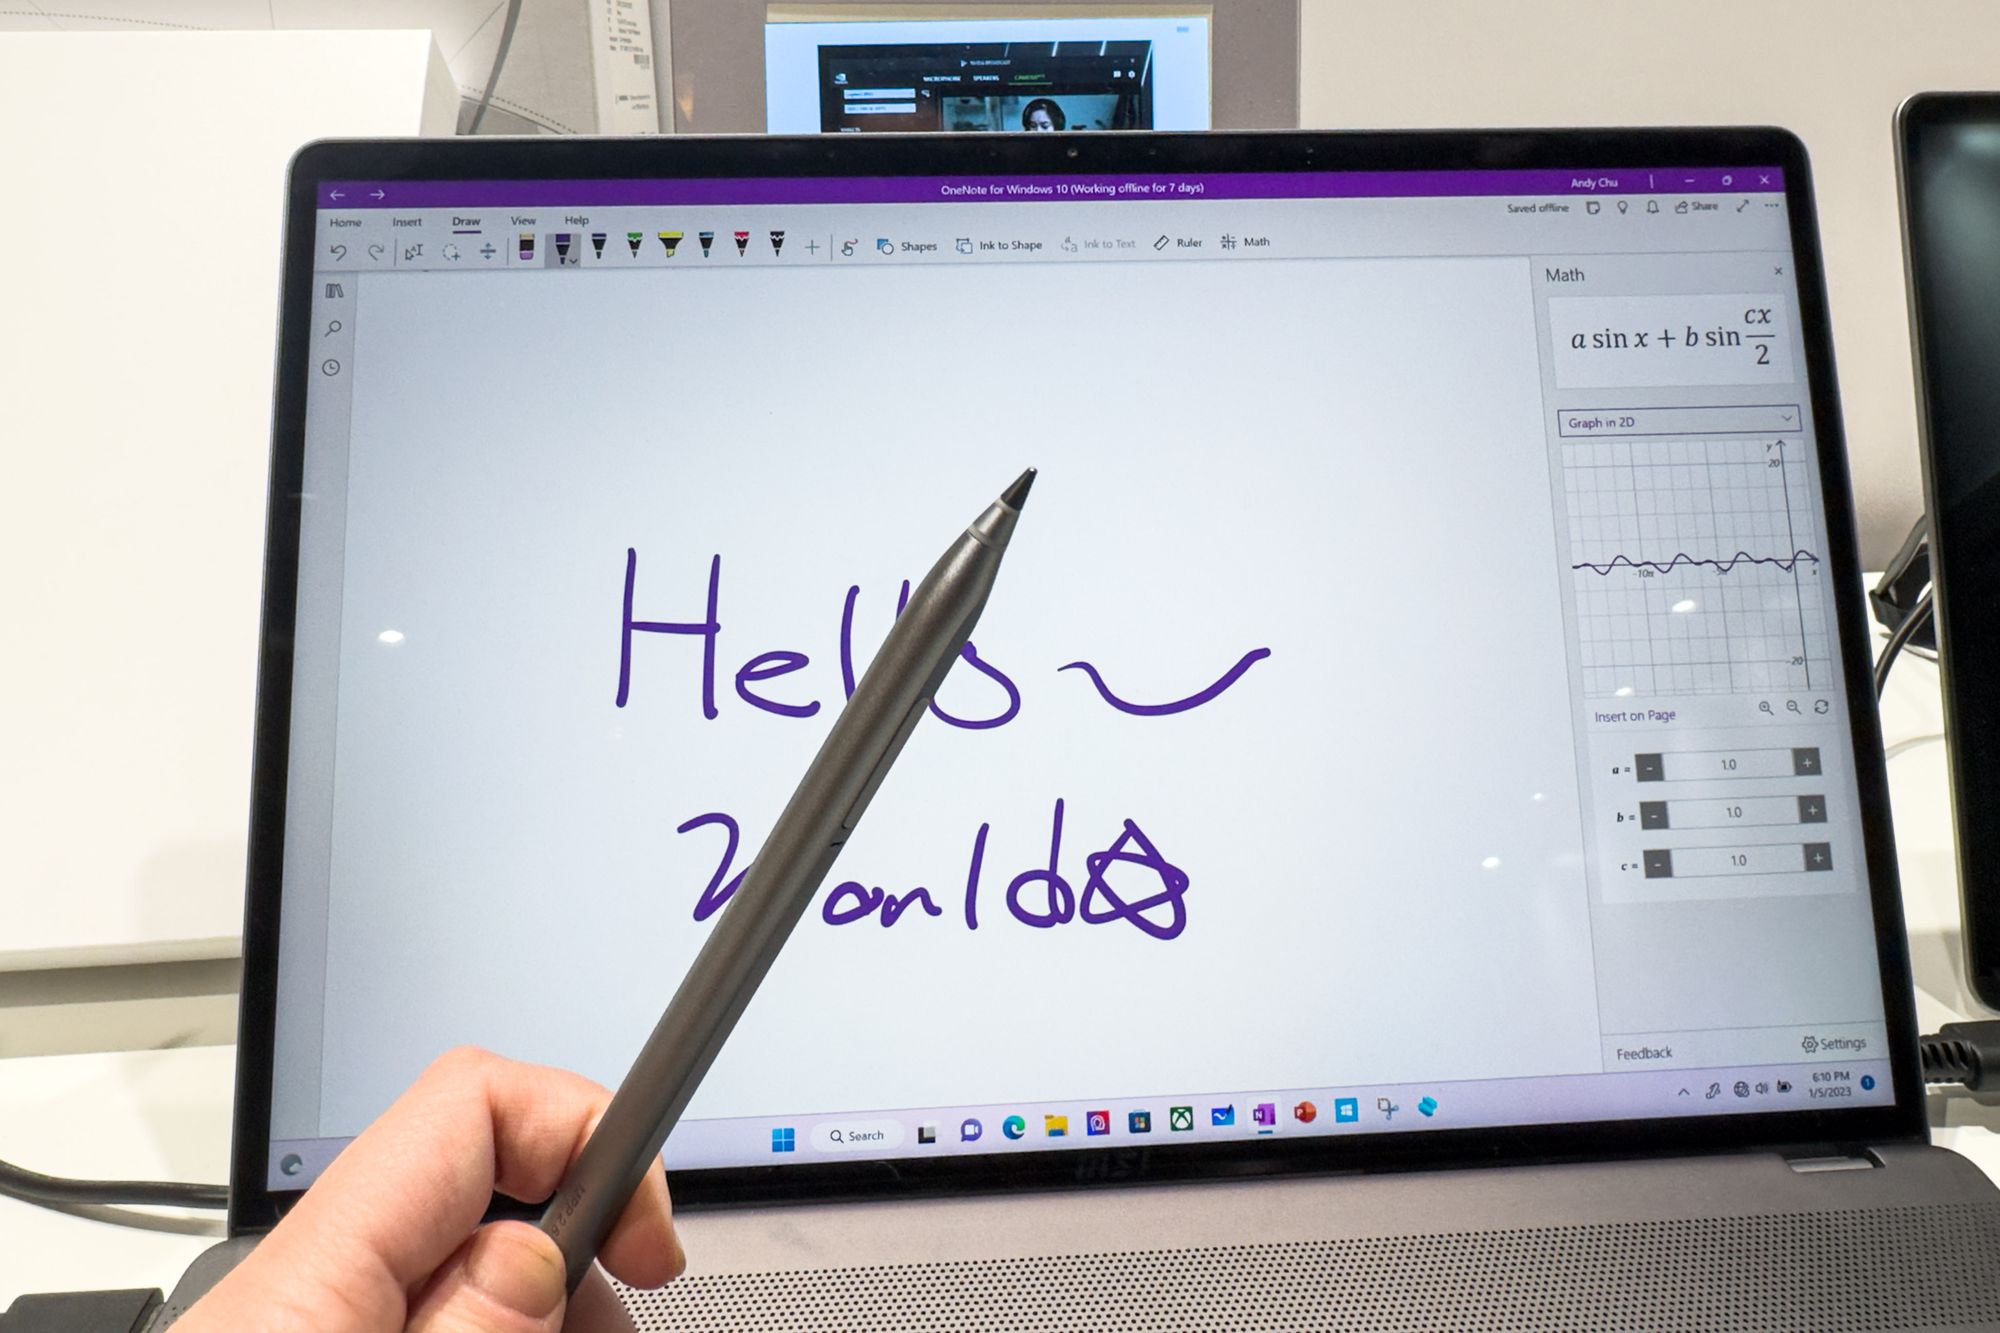 MSI introduced the Pen 2, which can write both on the screen and on paper